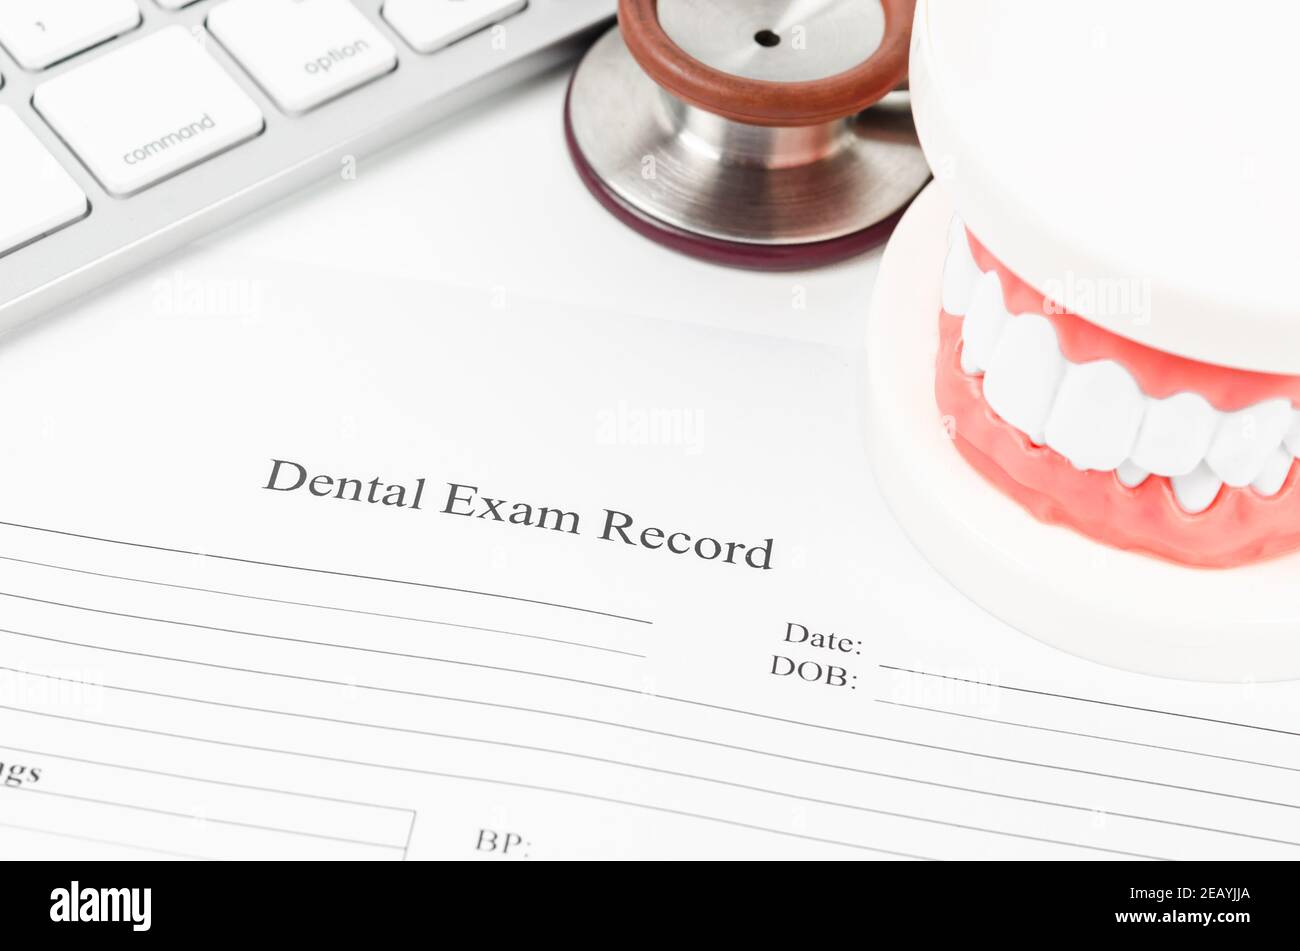 Dental exam record and model teeth with stethoscope medical on work table. Stock Photo